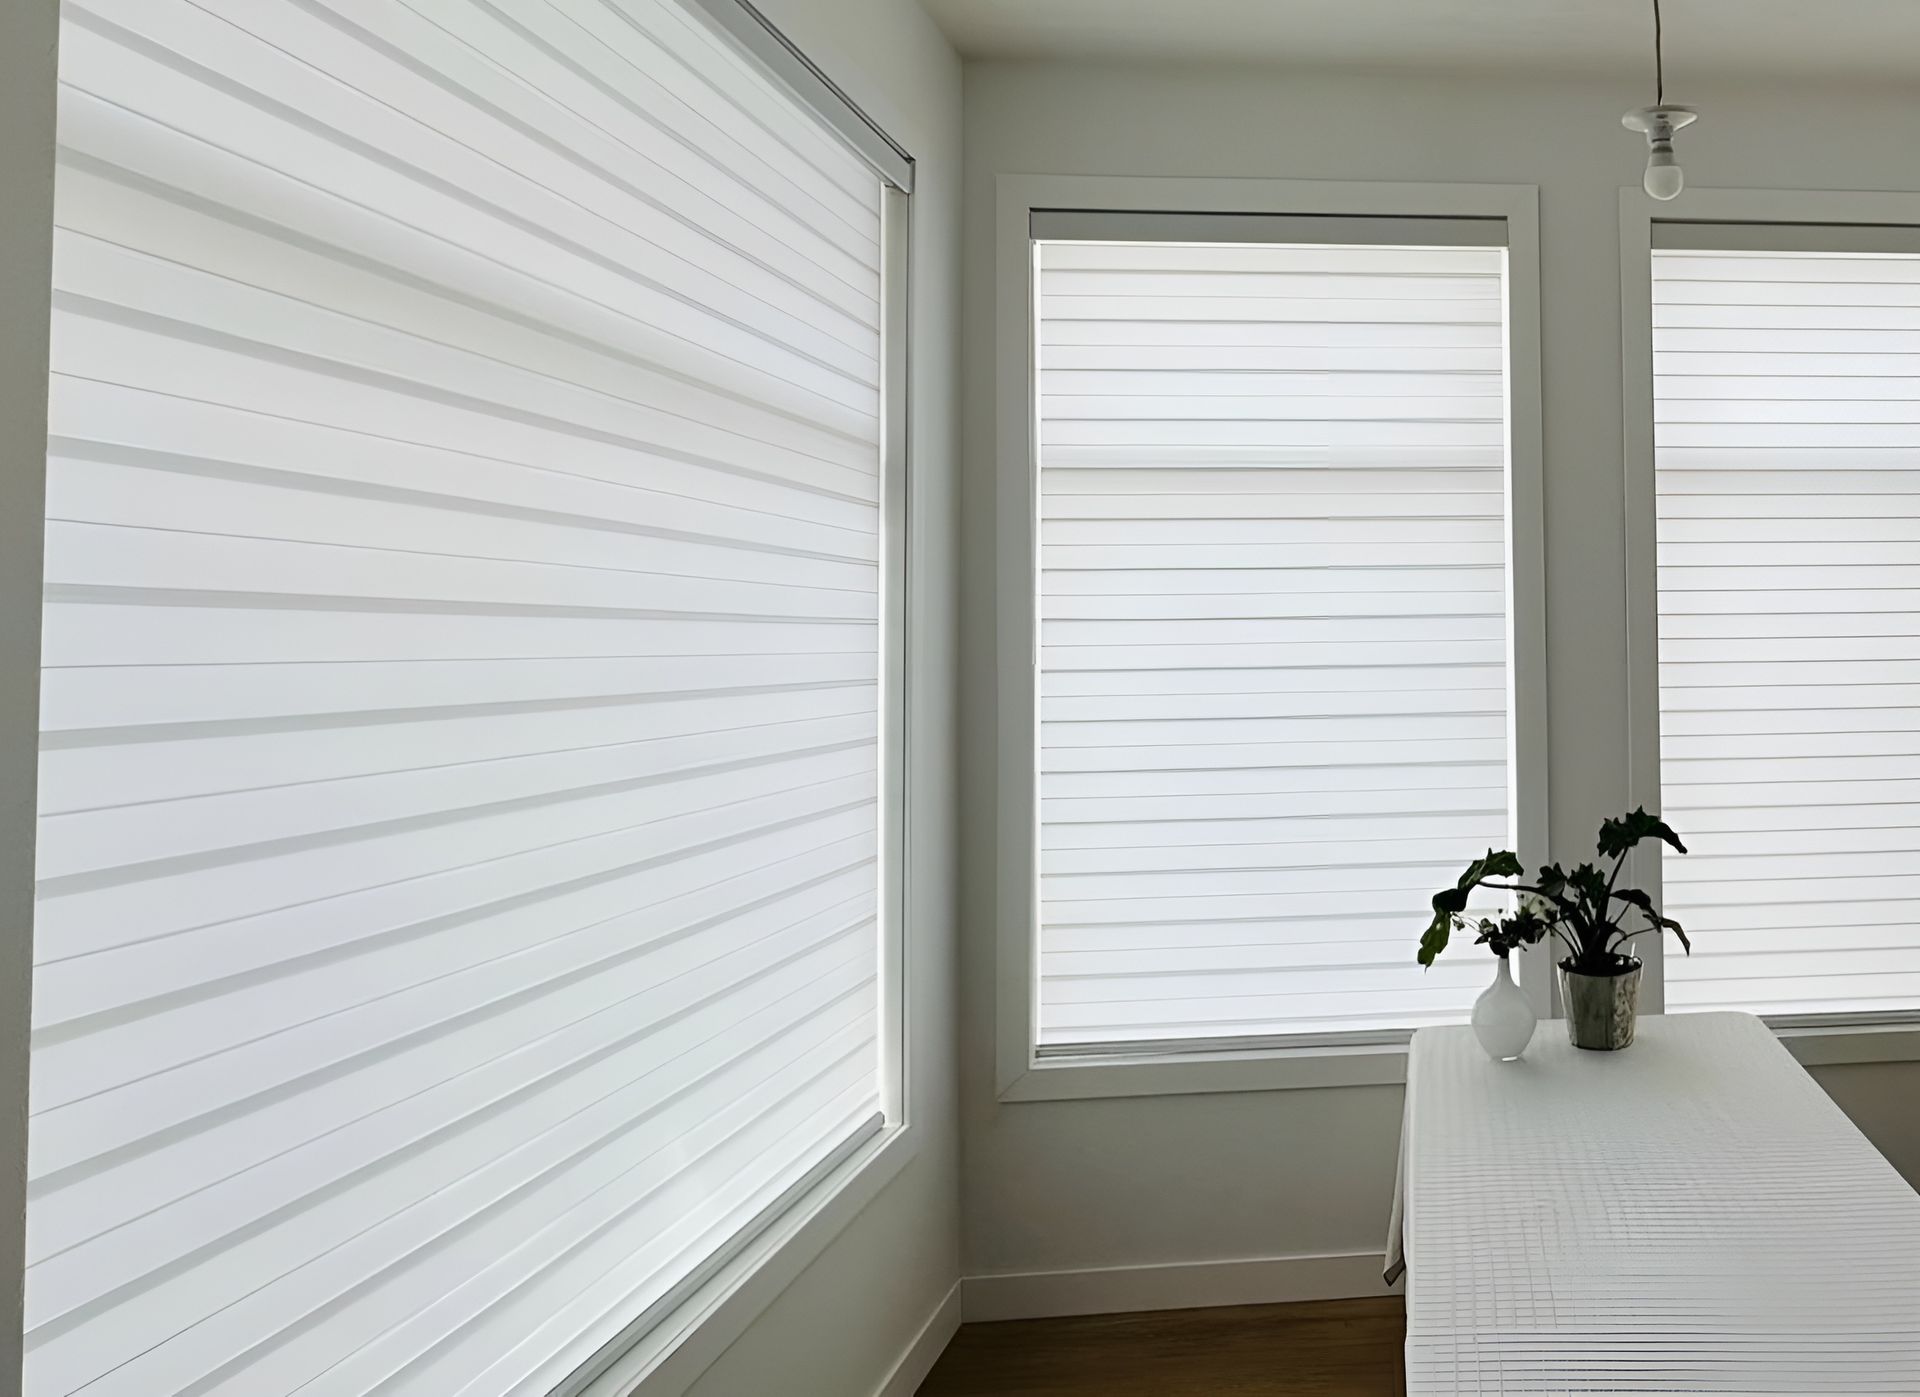 A room with white blinds on the windows and a plant on the table.